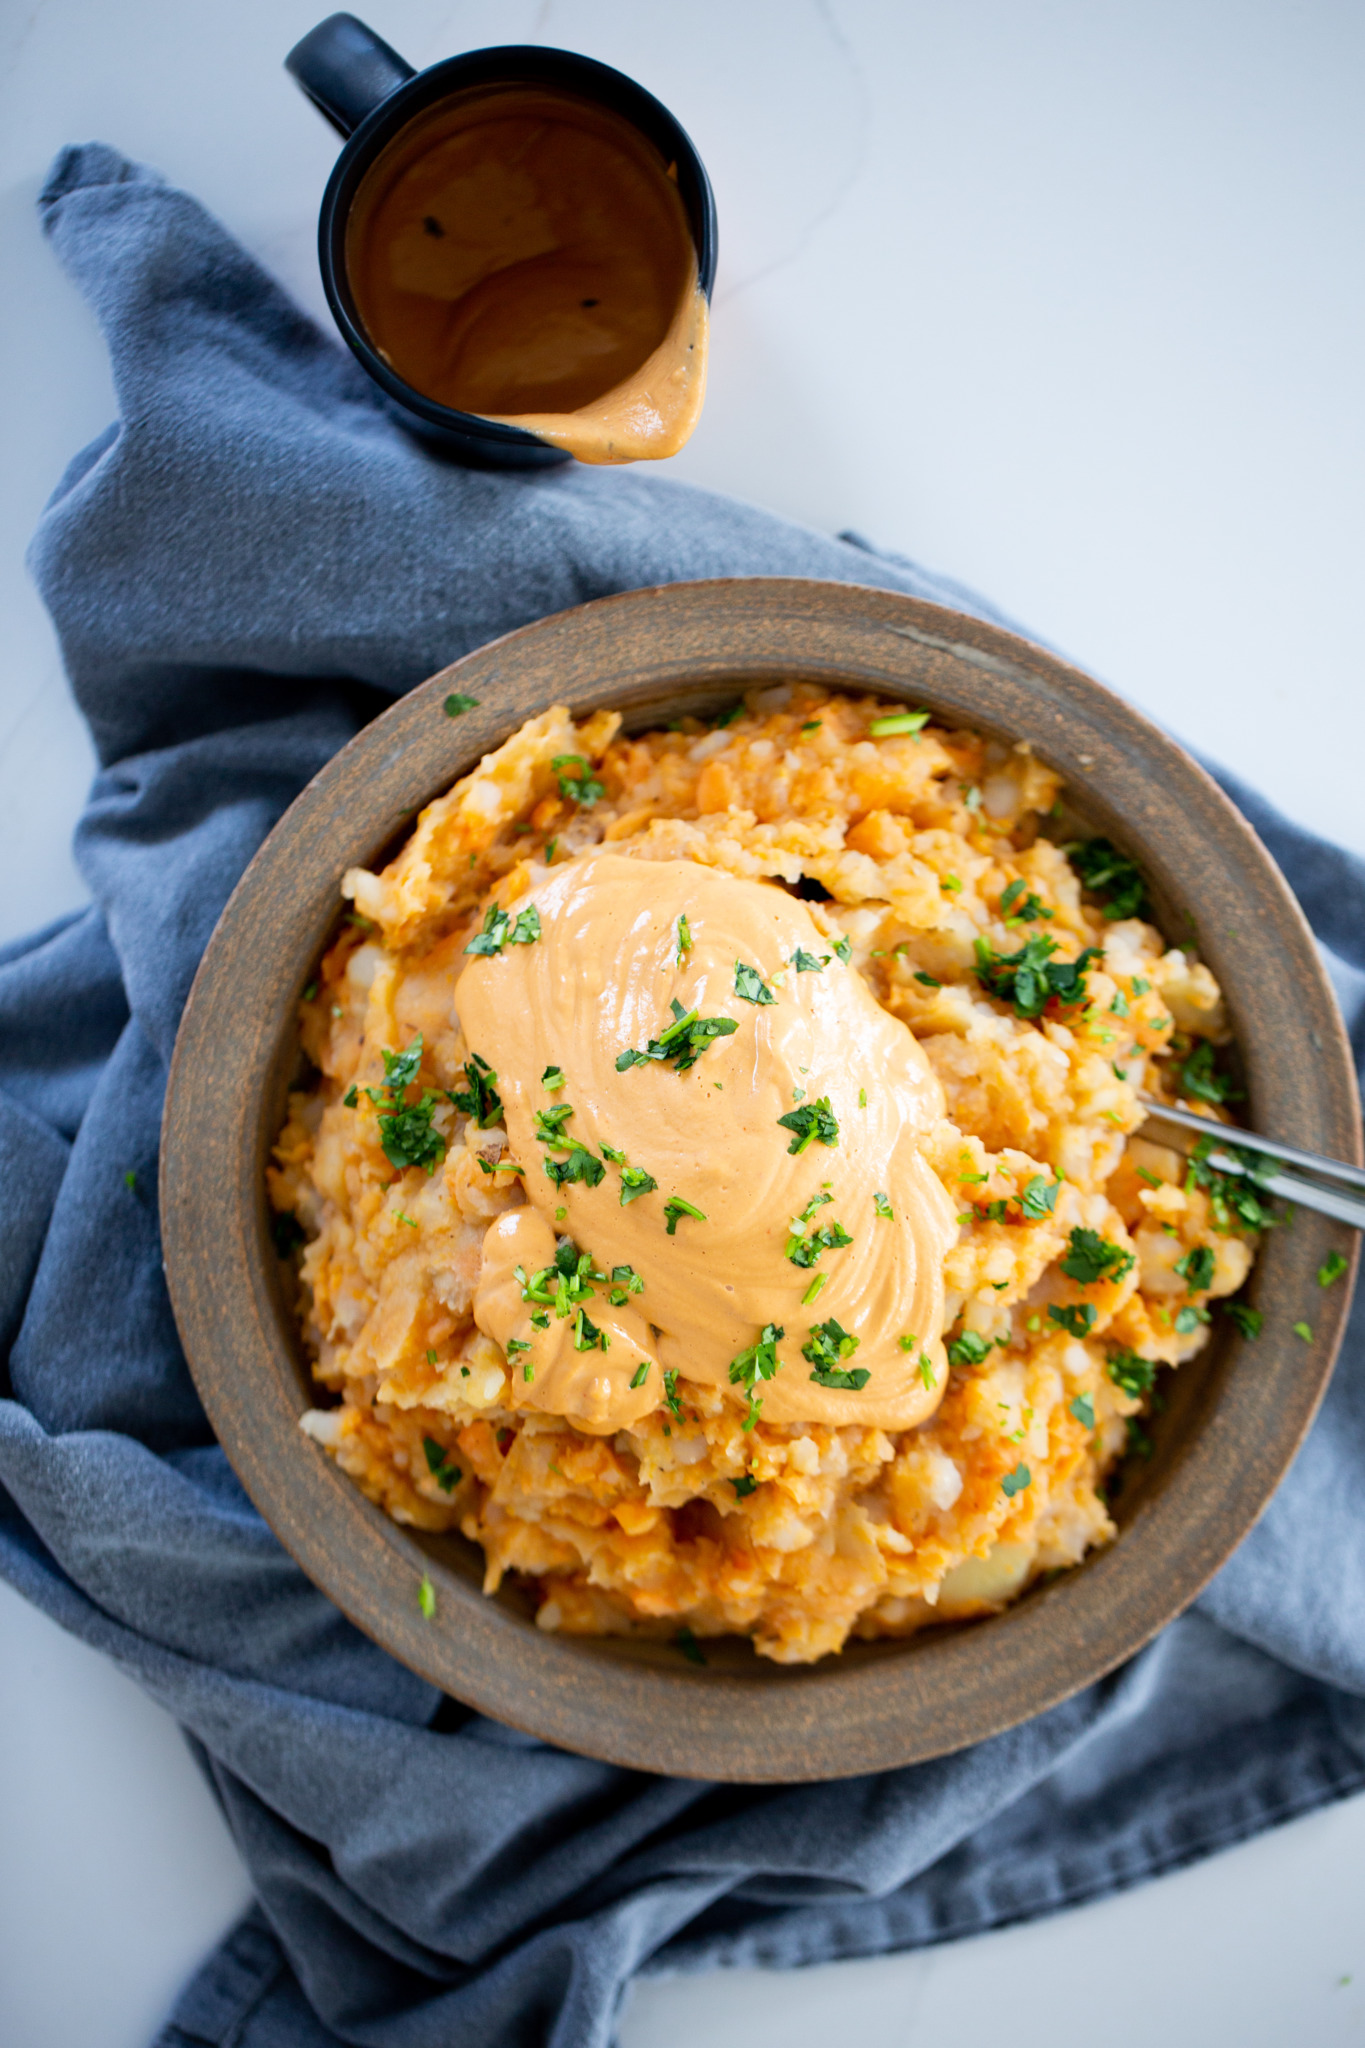 mashed sweet potatoes with vegan chipotle queso and yukon potatoes